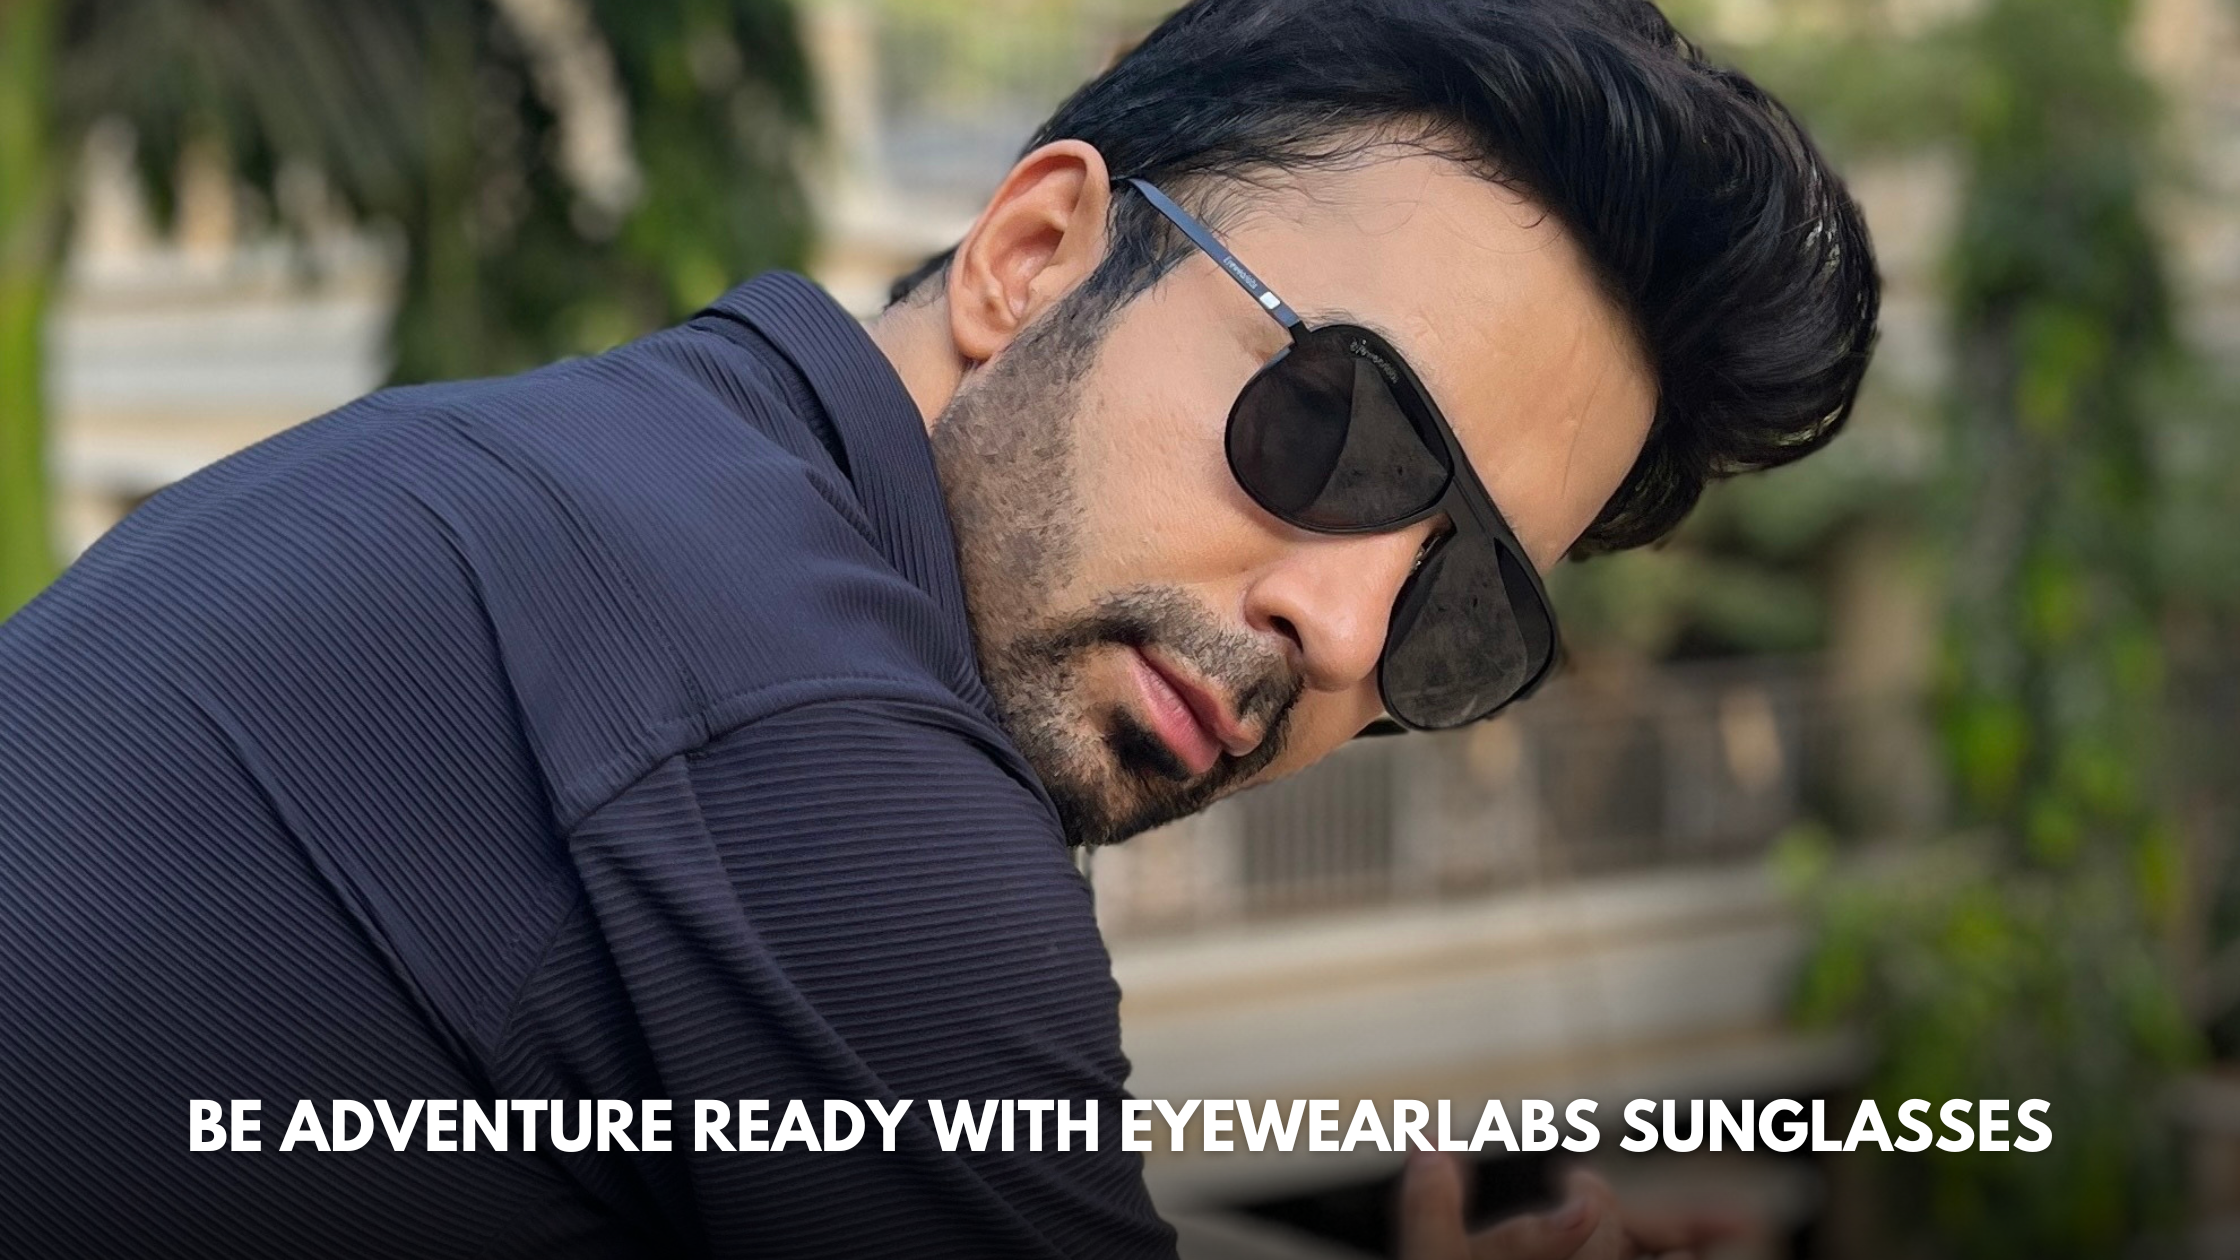 Be Ready Adventure with Eyewearlabs Sunglasses